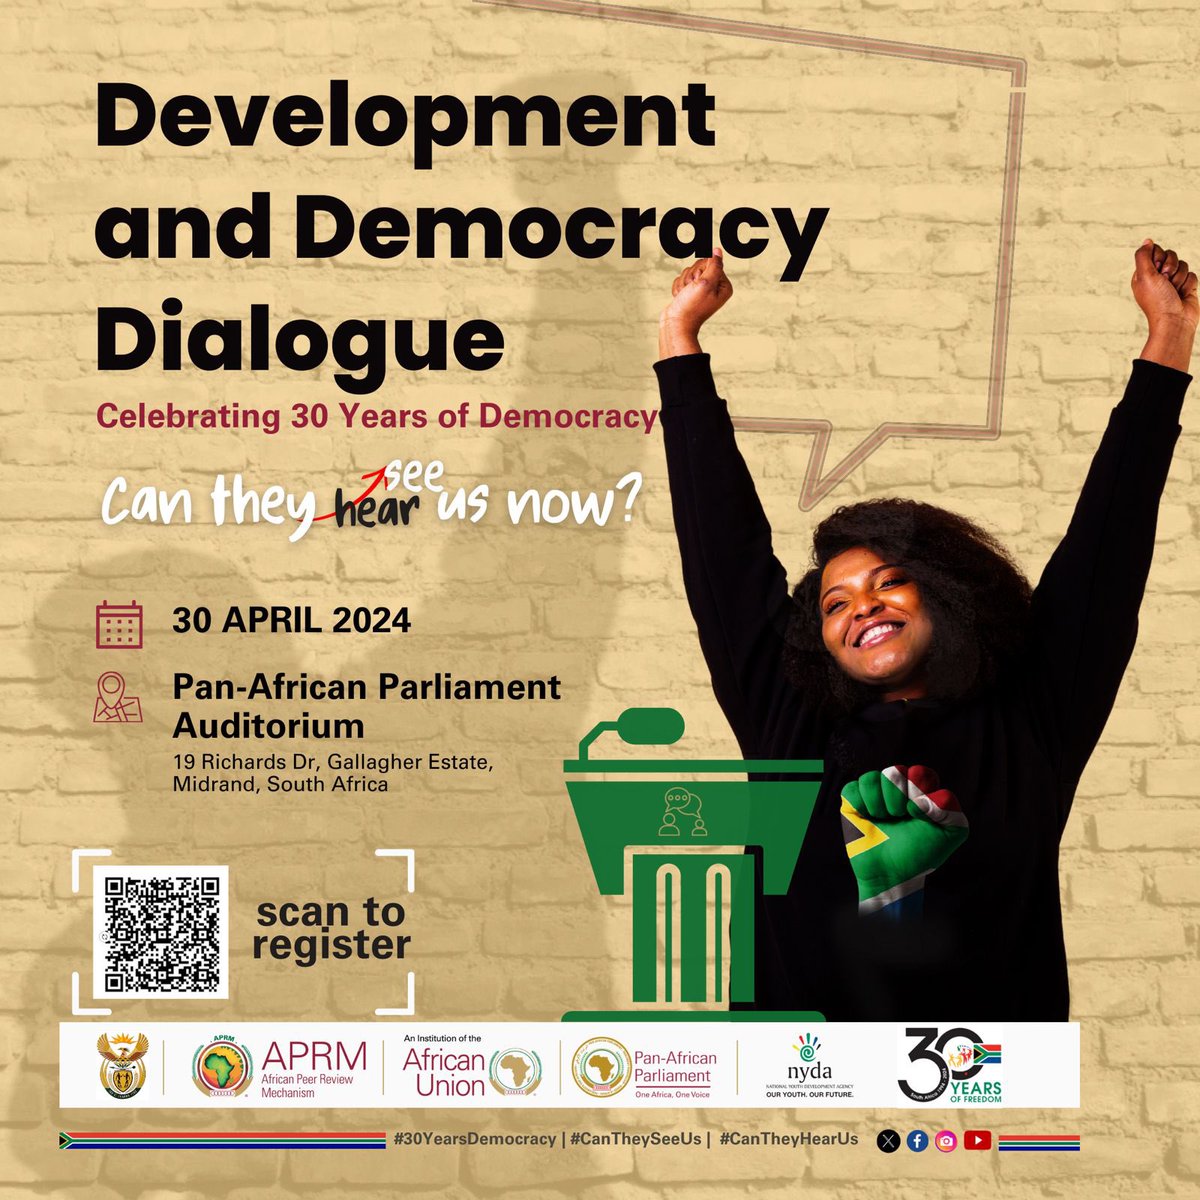 In celebrating South Africa's 30th Anniversary of Democracy, the APRM is excited to announce the Development and Democracy Dialogue, set to take place at the Pan African Parliament  on April 30th, 2024 in partnership with @NYDARSA and @AfrikParliament .   This commemoration holds